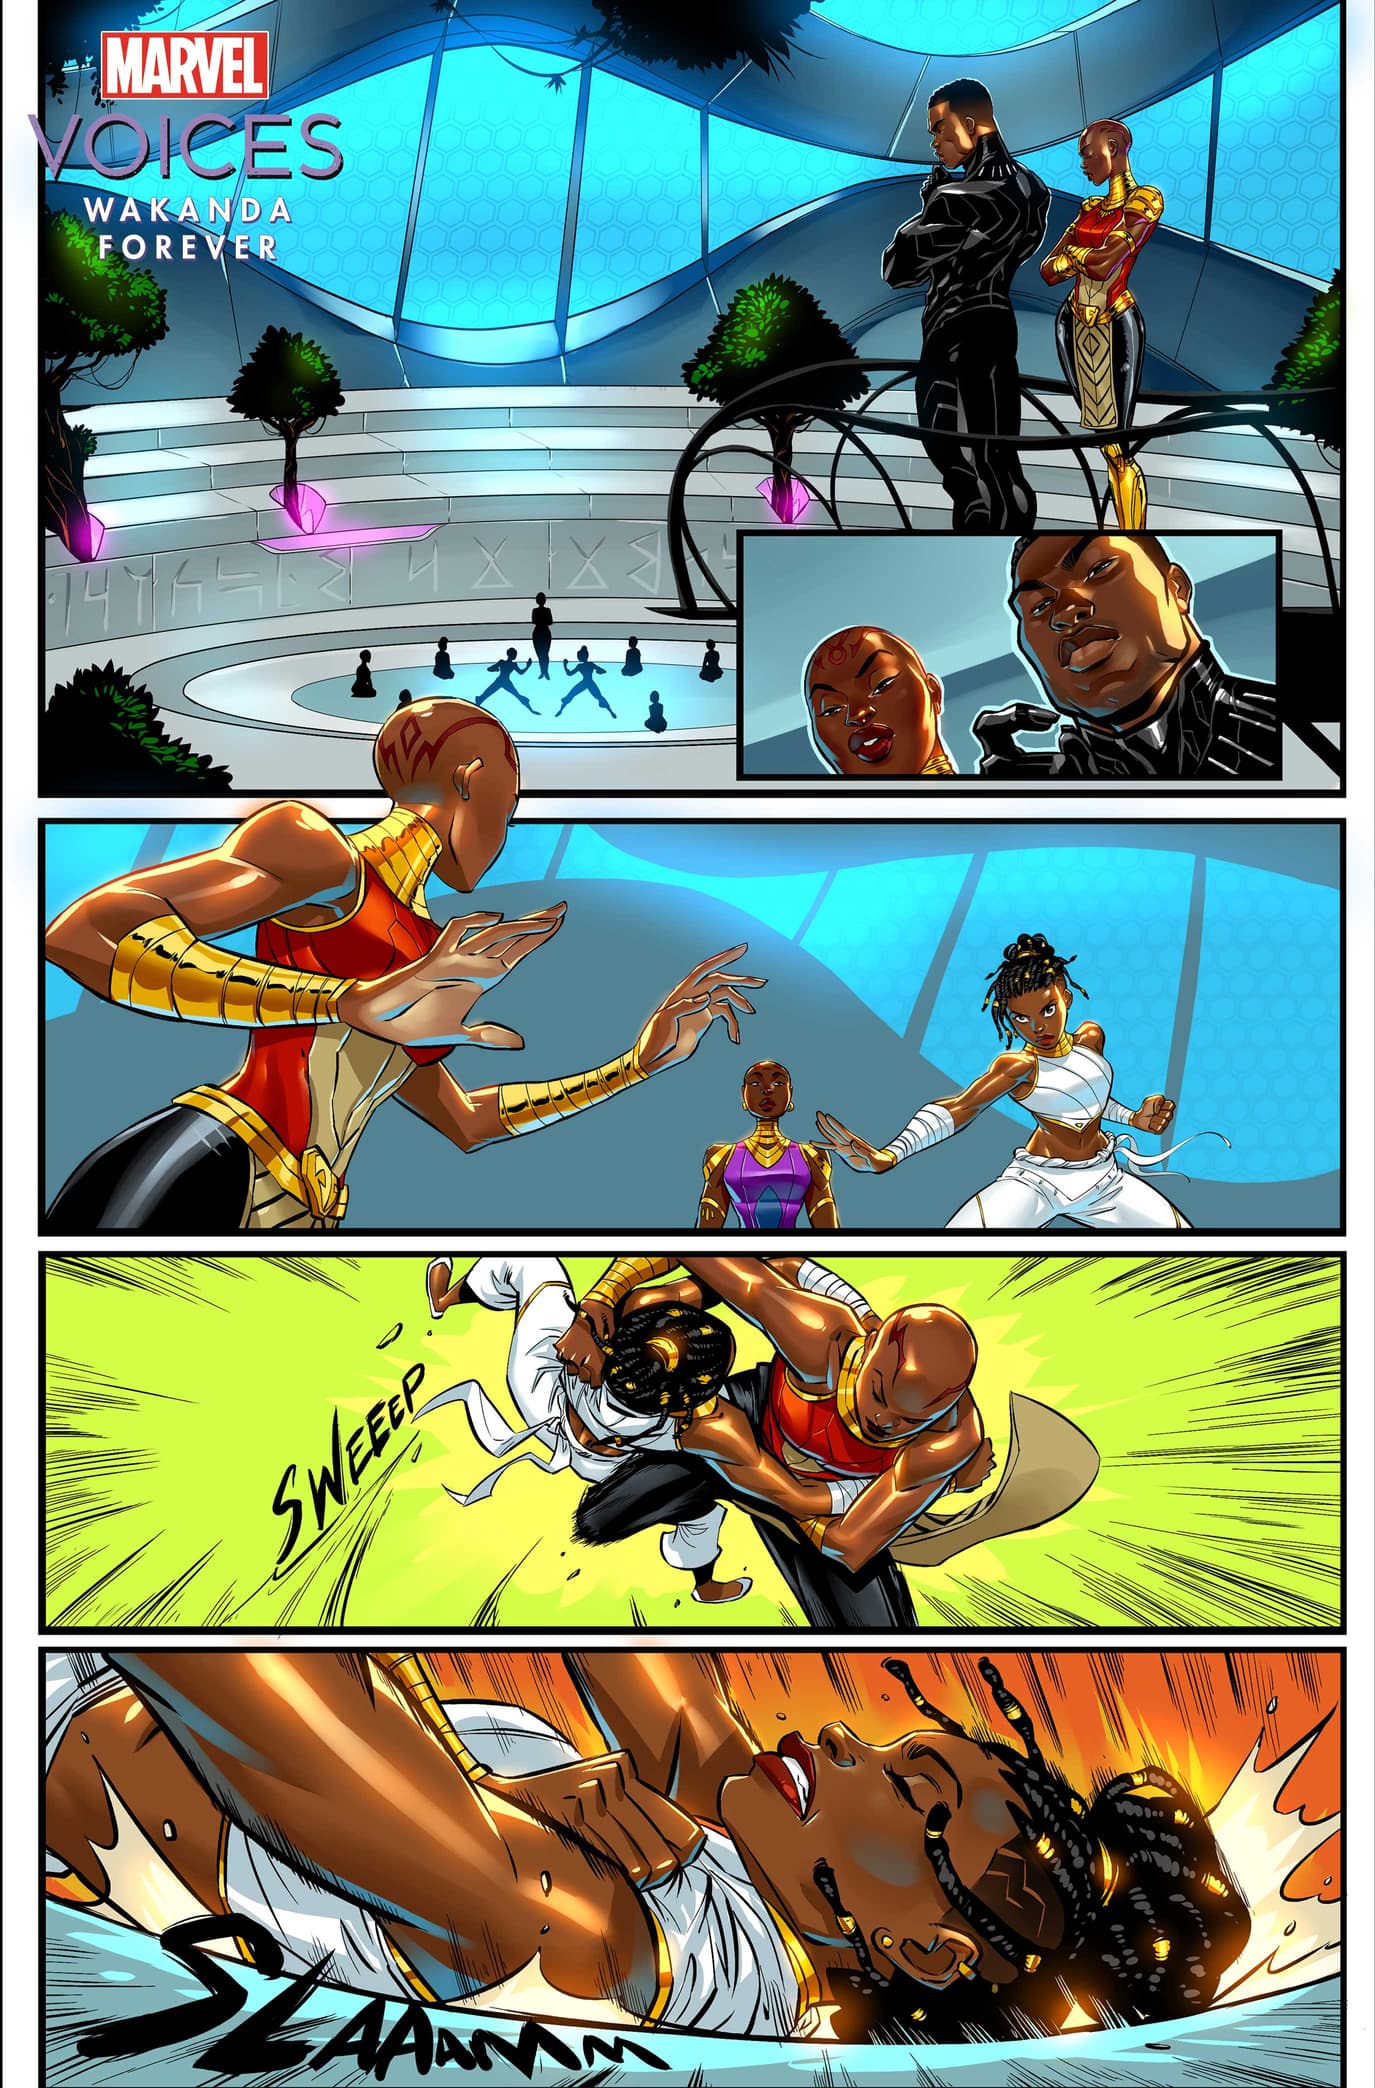 MARVEL’S VOICES: WAKANDA FOREVER #1—“The Illusion of Fairness” artwork by Marcus Williams